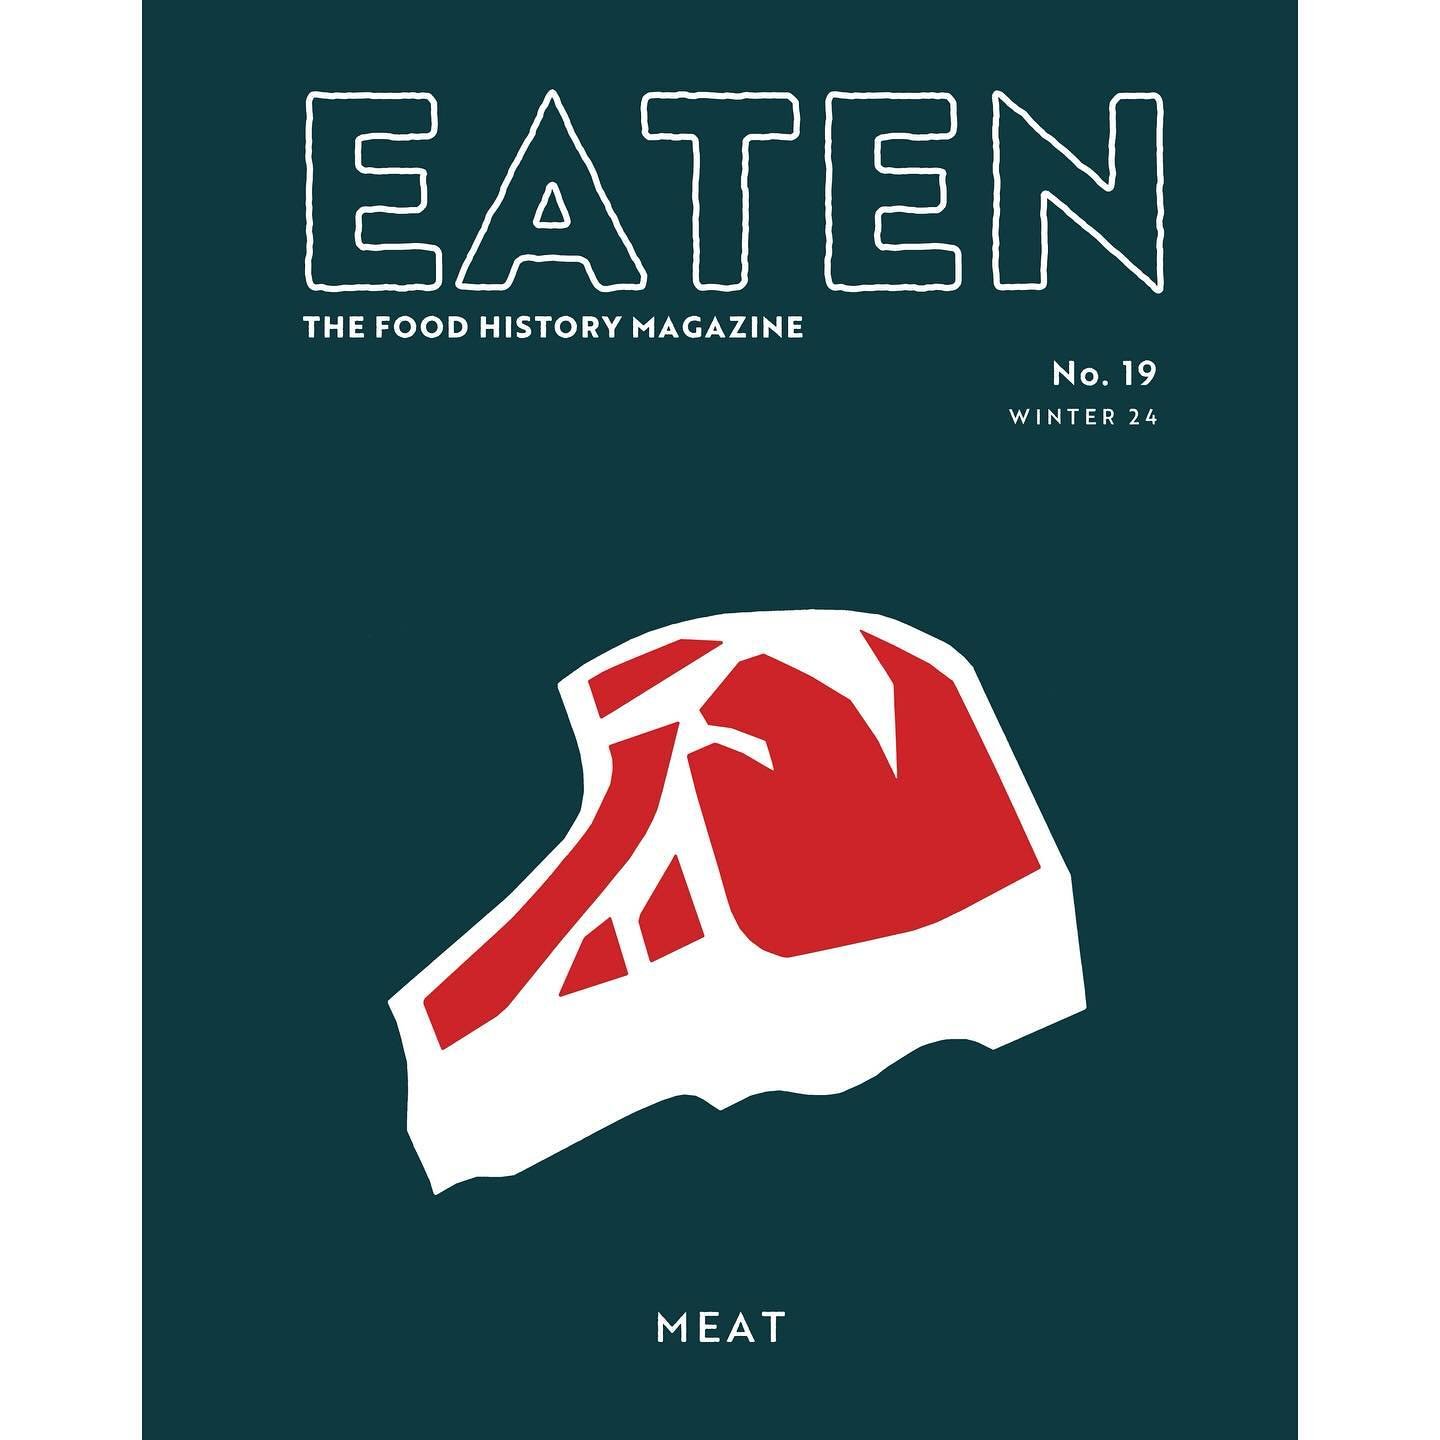 Introducting @eatenmag No.19: Meat. With essays on the d&ouml;ner kebap in Berlin, the life and times of a very carnivorous Indian king to a biography of the world's oldest ham! Out now.